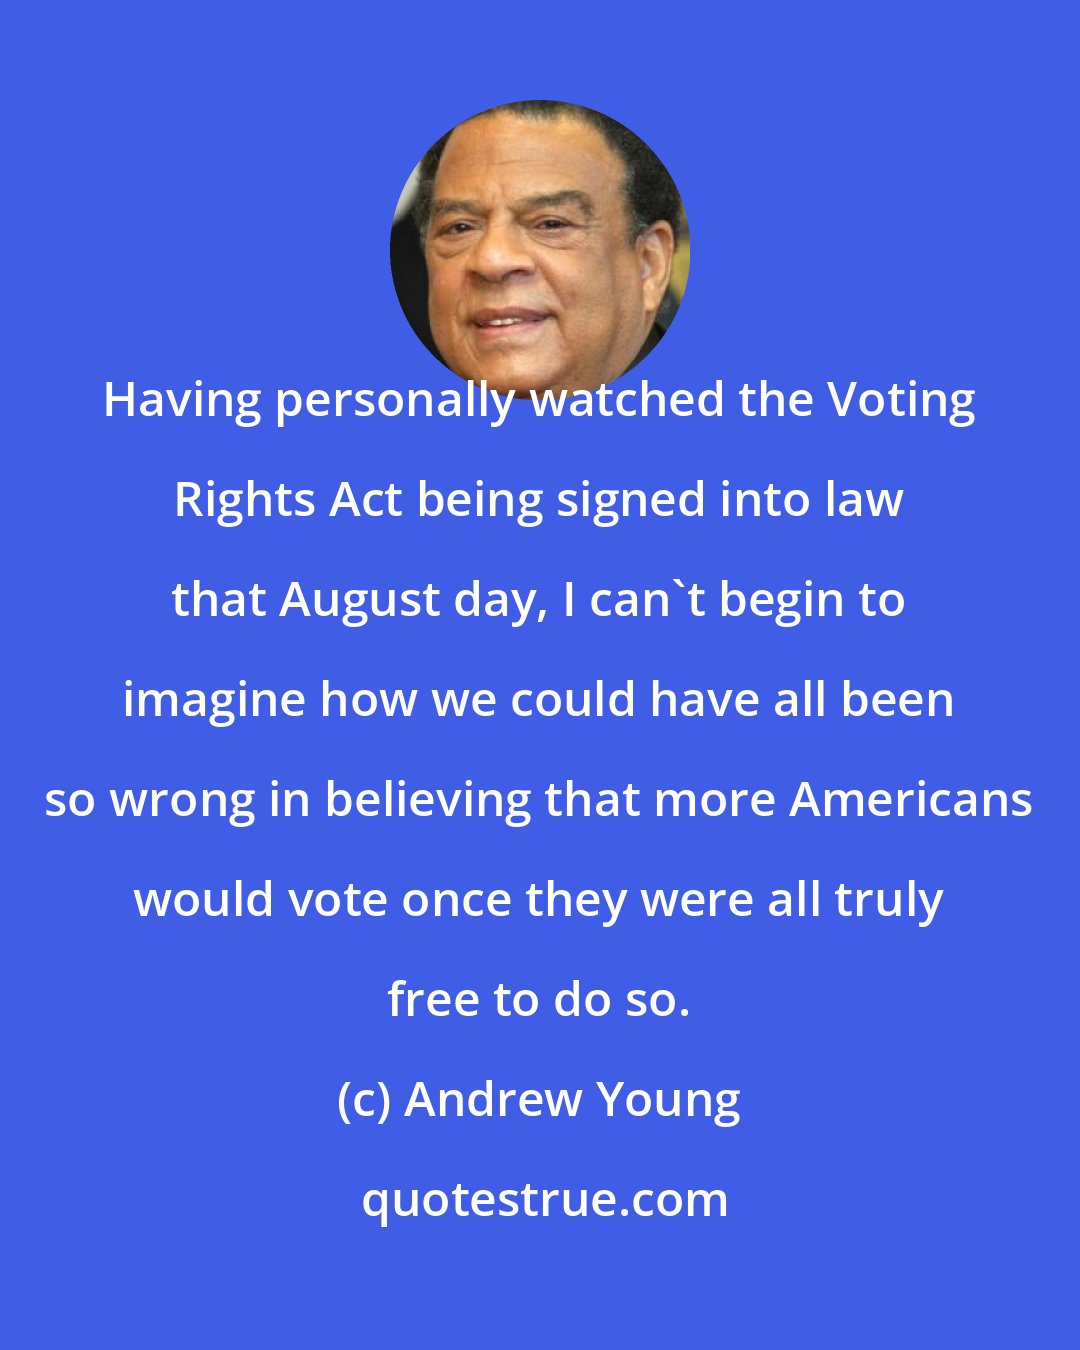 Andrew Young: Having personally watched the Voting Rights Act being signed into law that August day, I can't begin to imagine how we could have all been so wrong in believing that more Americans would vote once they were all truly free to do so.